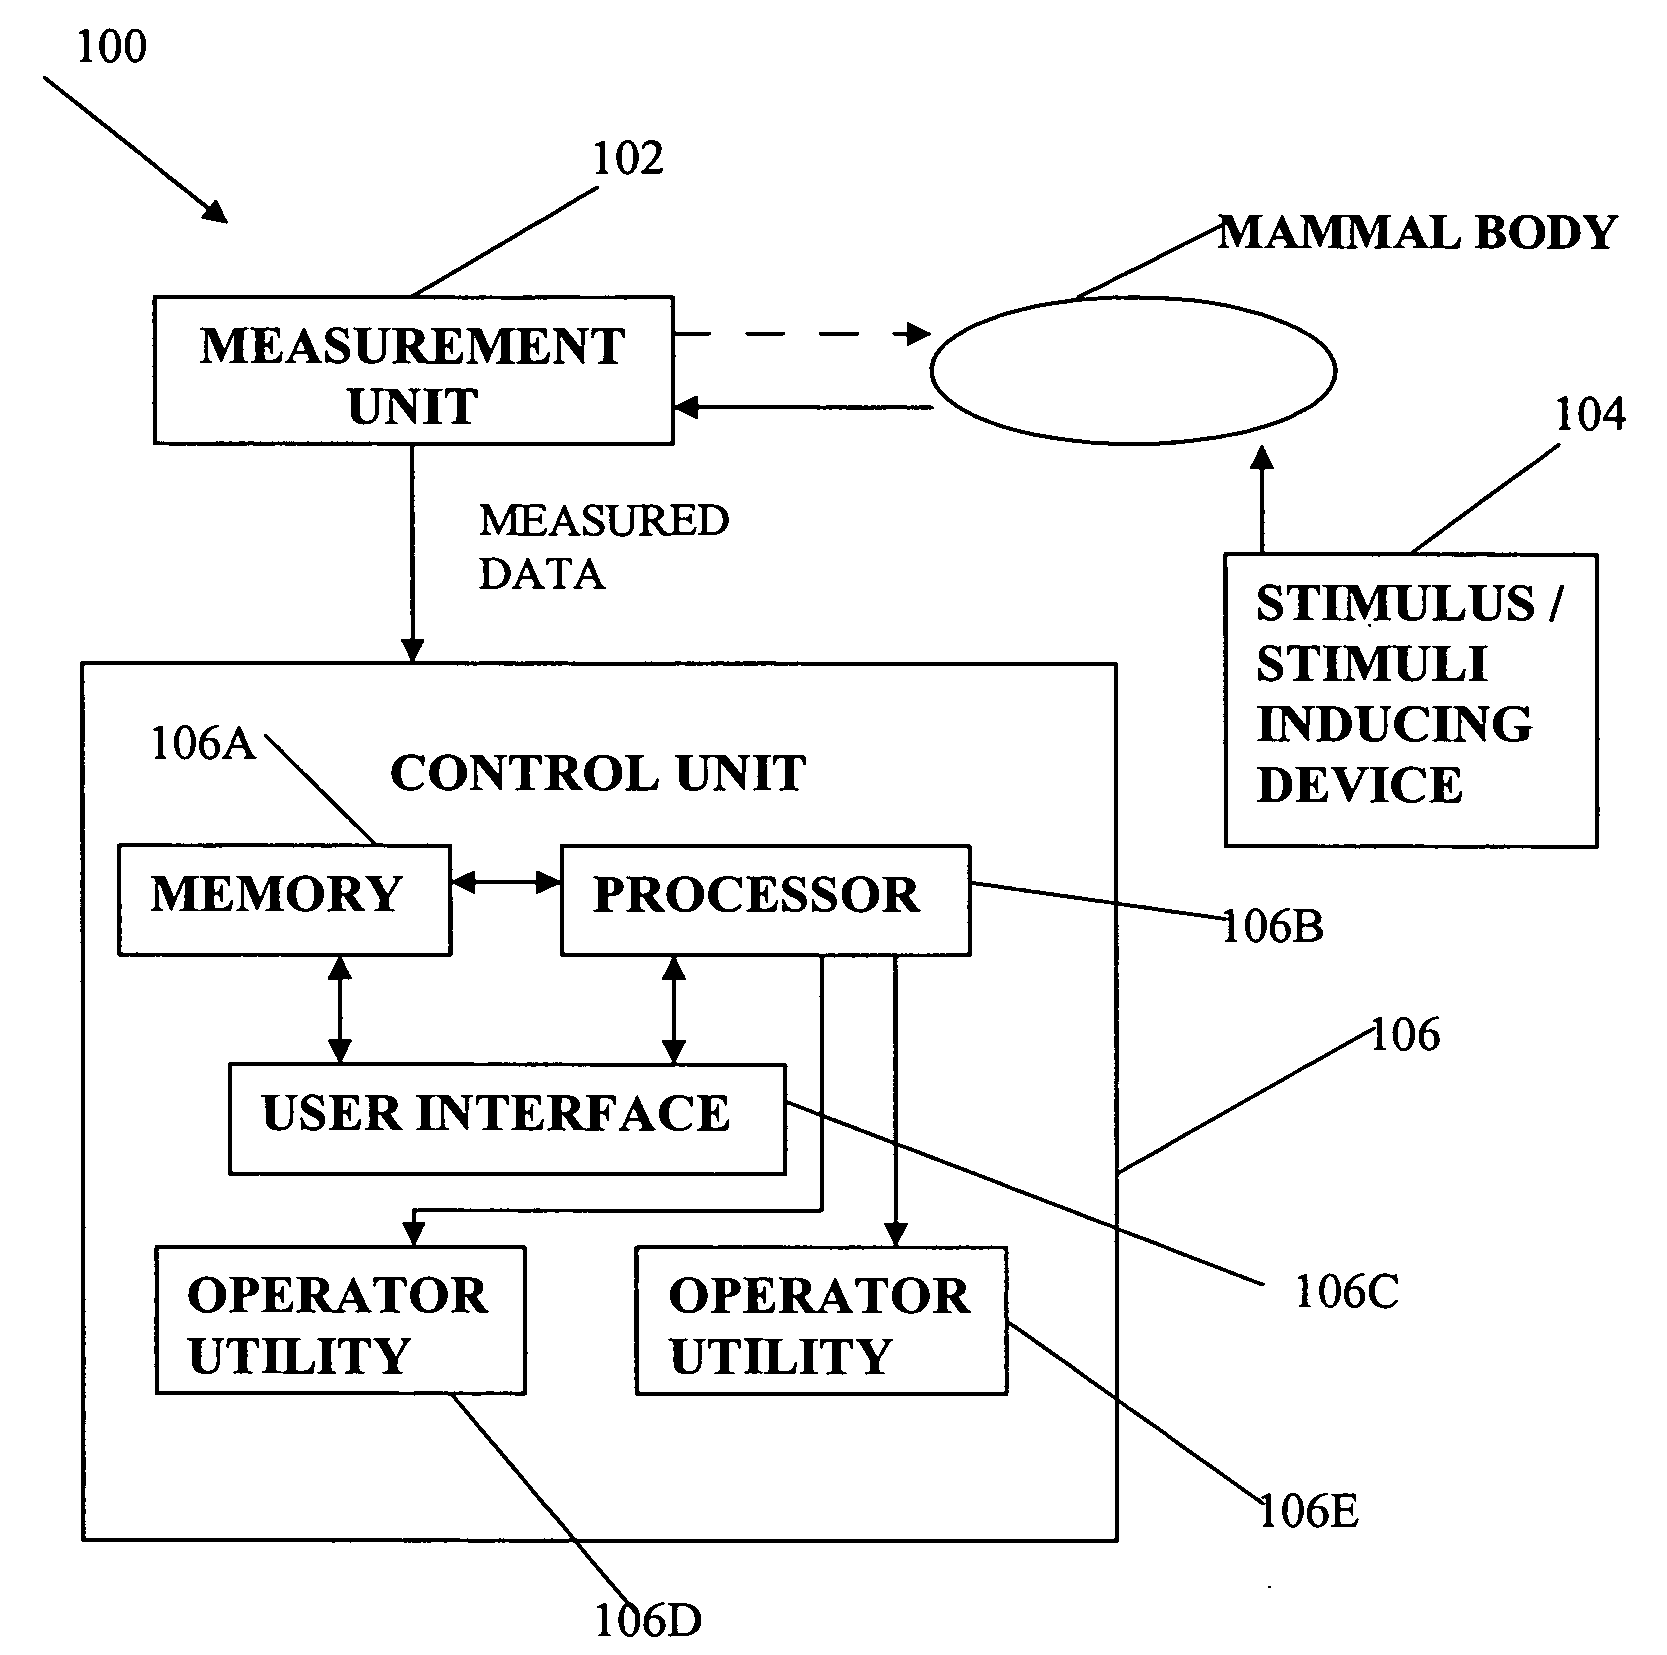 Methods and apparatus for non-invasive determination of patient's blood conditions